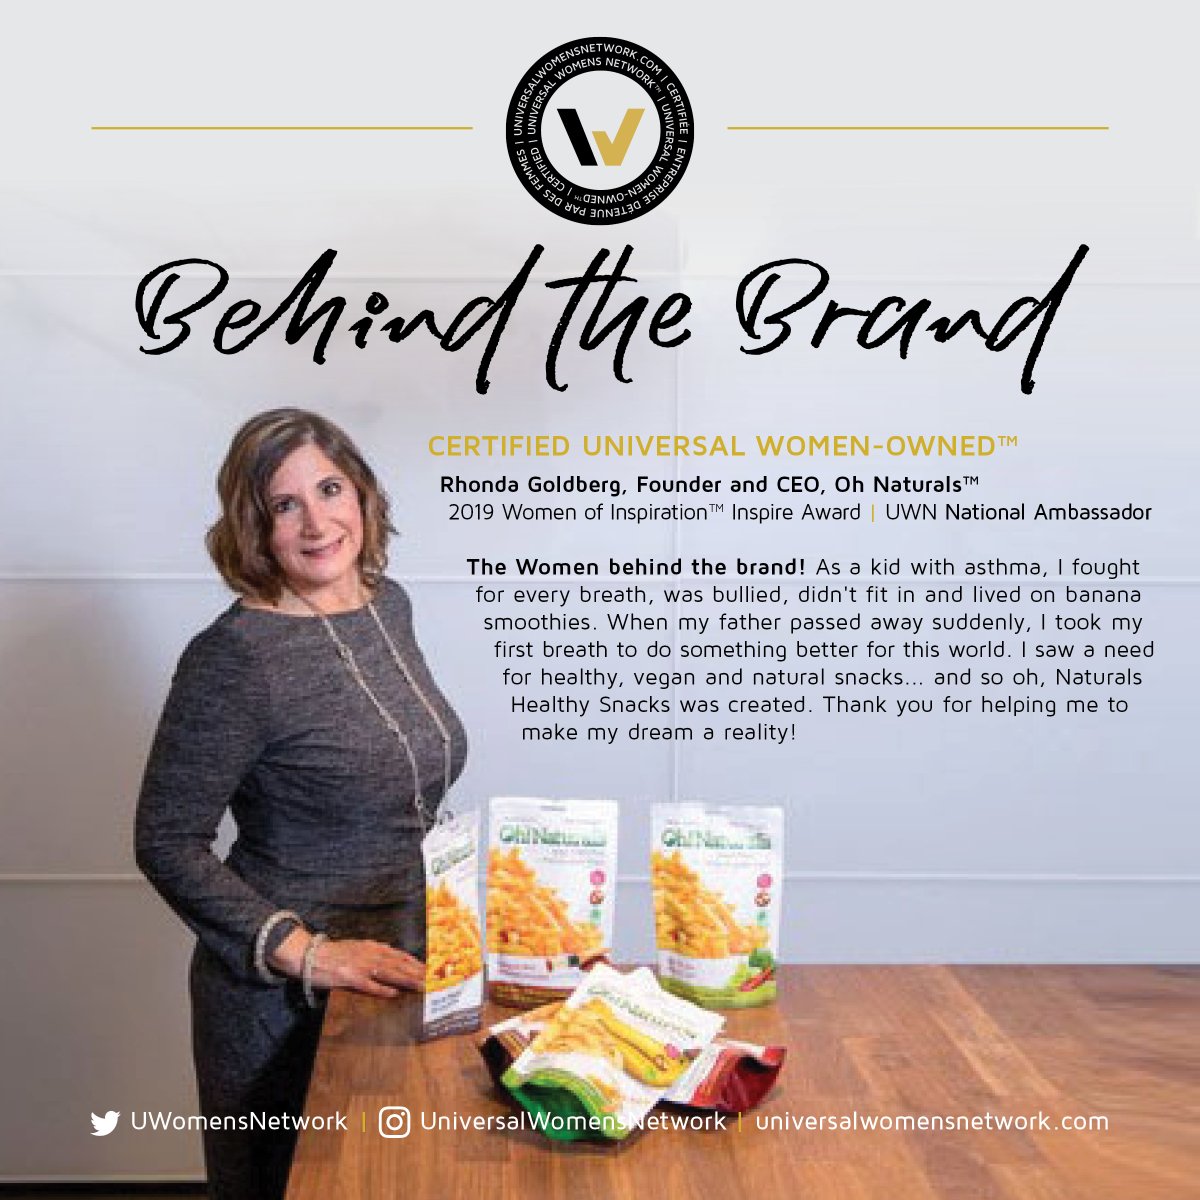 We are elevating Certified Universal Women-Owned™ and Universal Women-Led™ businesses Behind the Brand. Meet Rhonda Goldberg, Founder, and CEO, OH! Naturals! Learn her story and how she is now on the shelves in stores near you distributes nationally!► universalwomensnetwork.com/oh-naturals-fl…